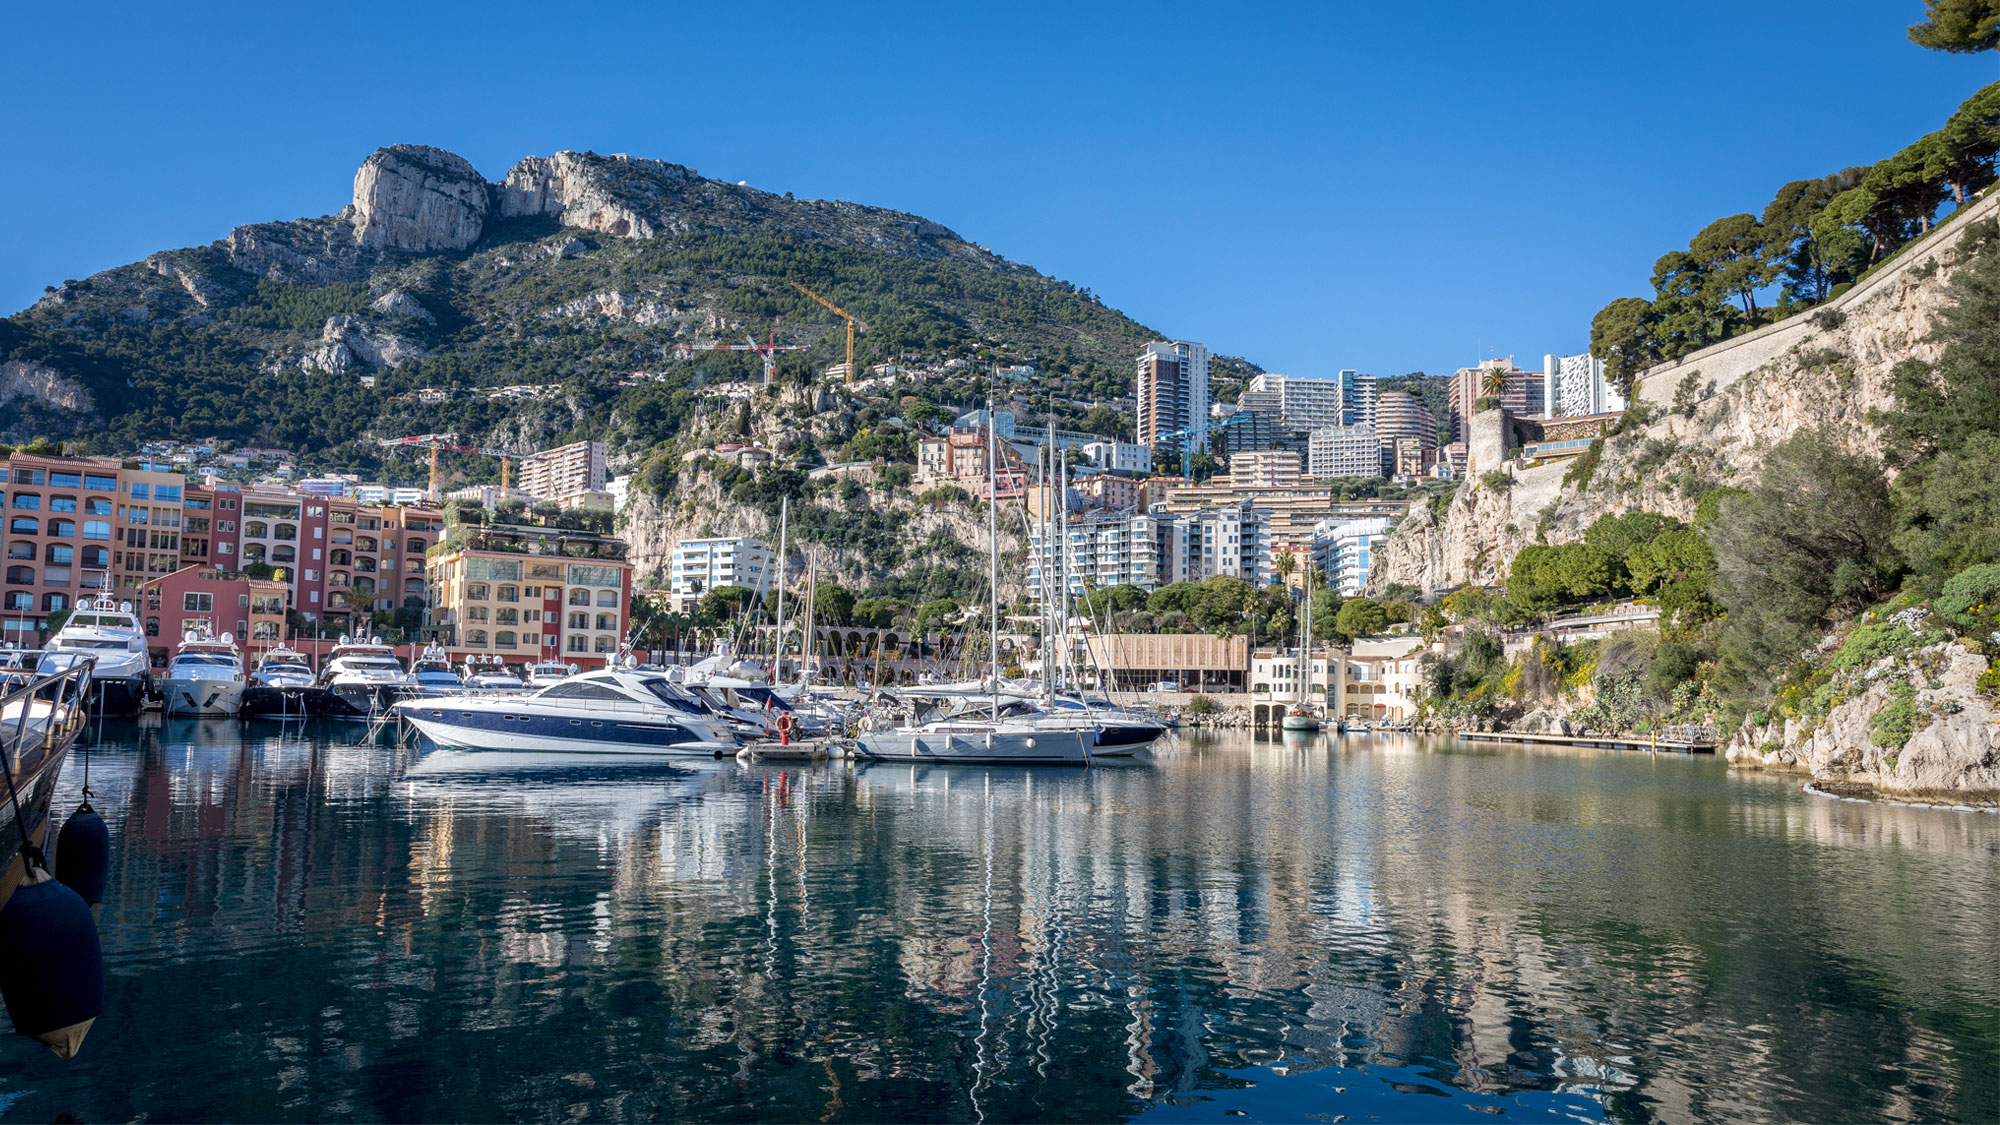 Monaco property in marina in Fontvieille Monaco with yachts in the background